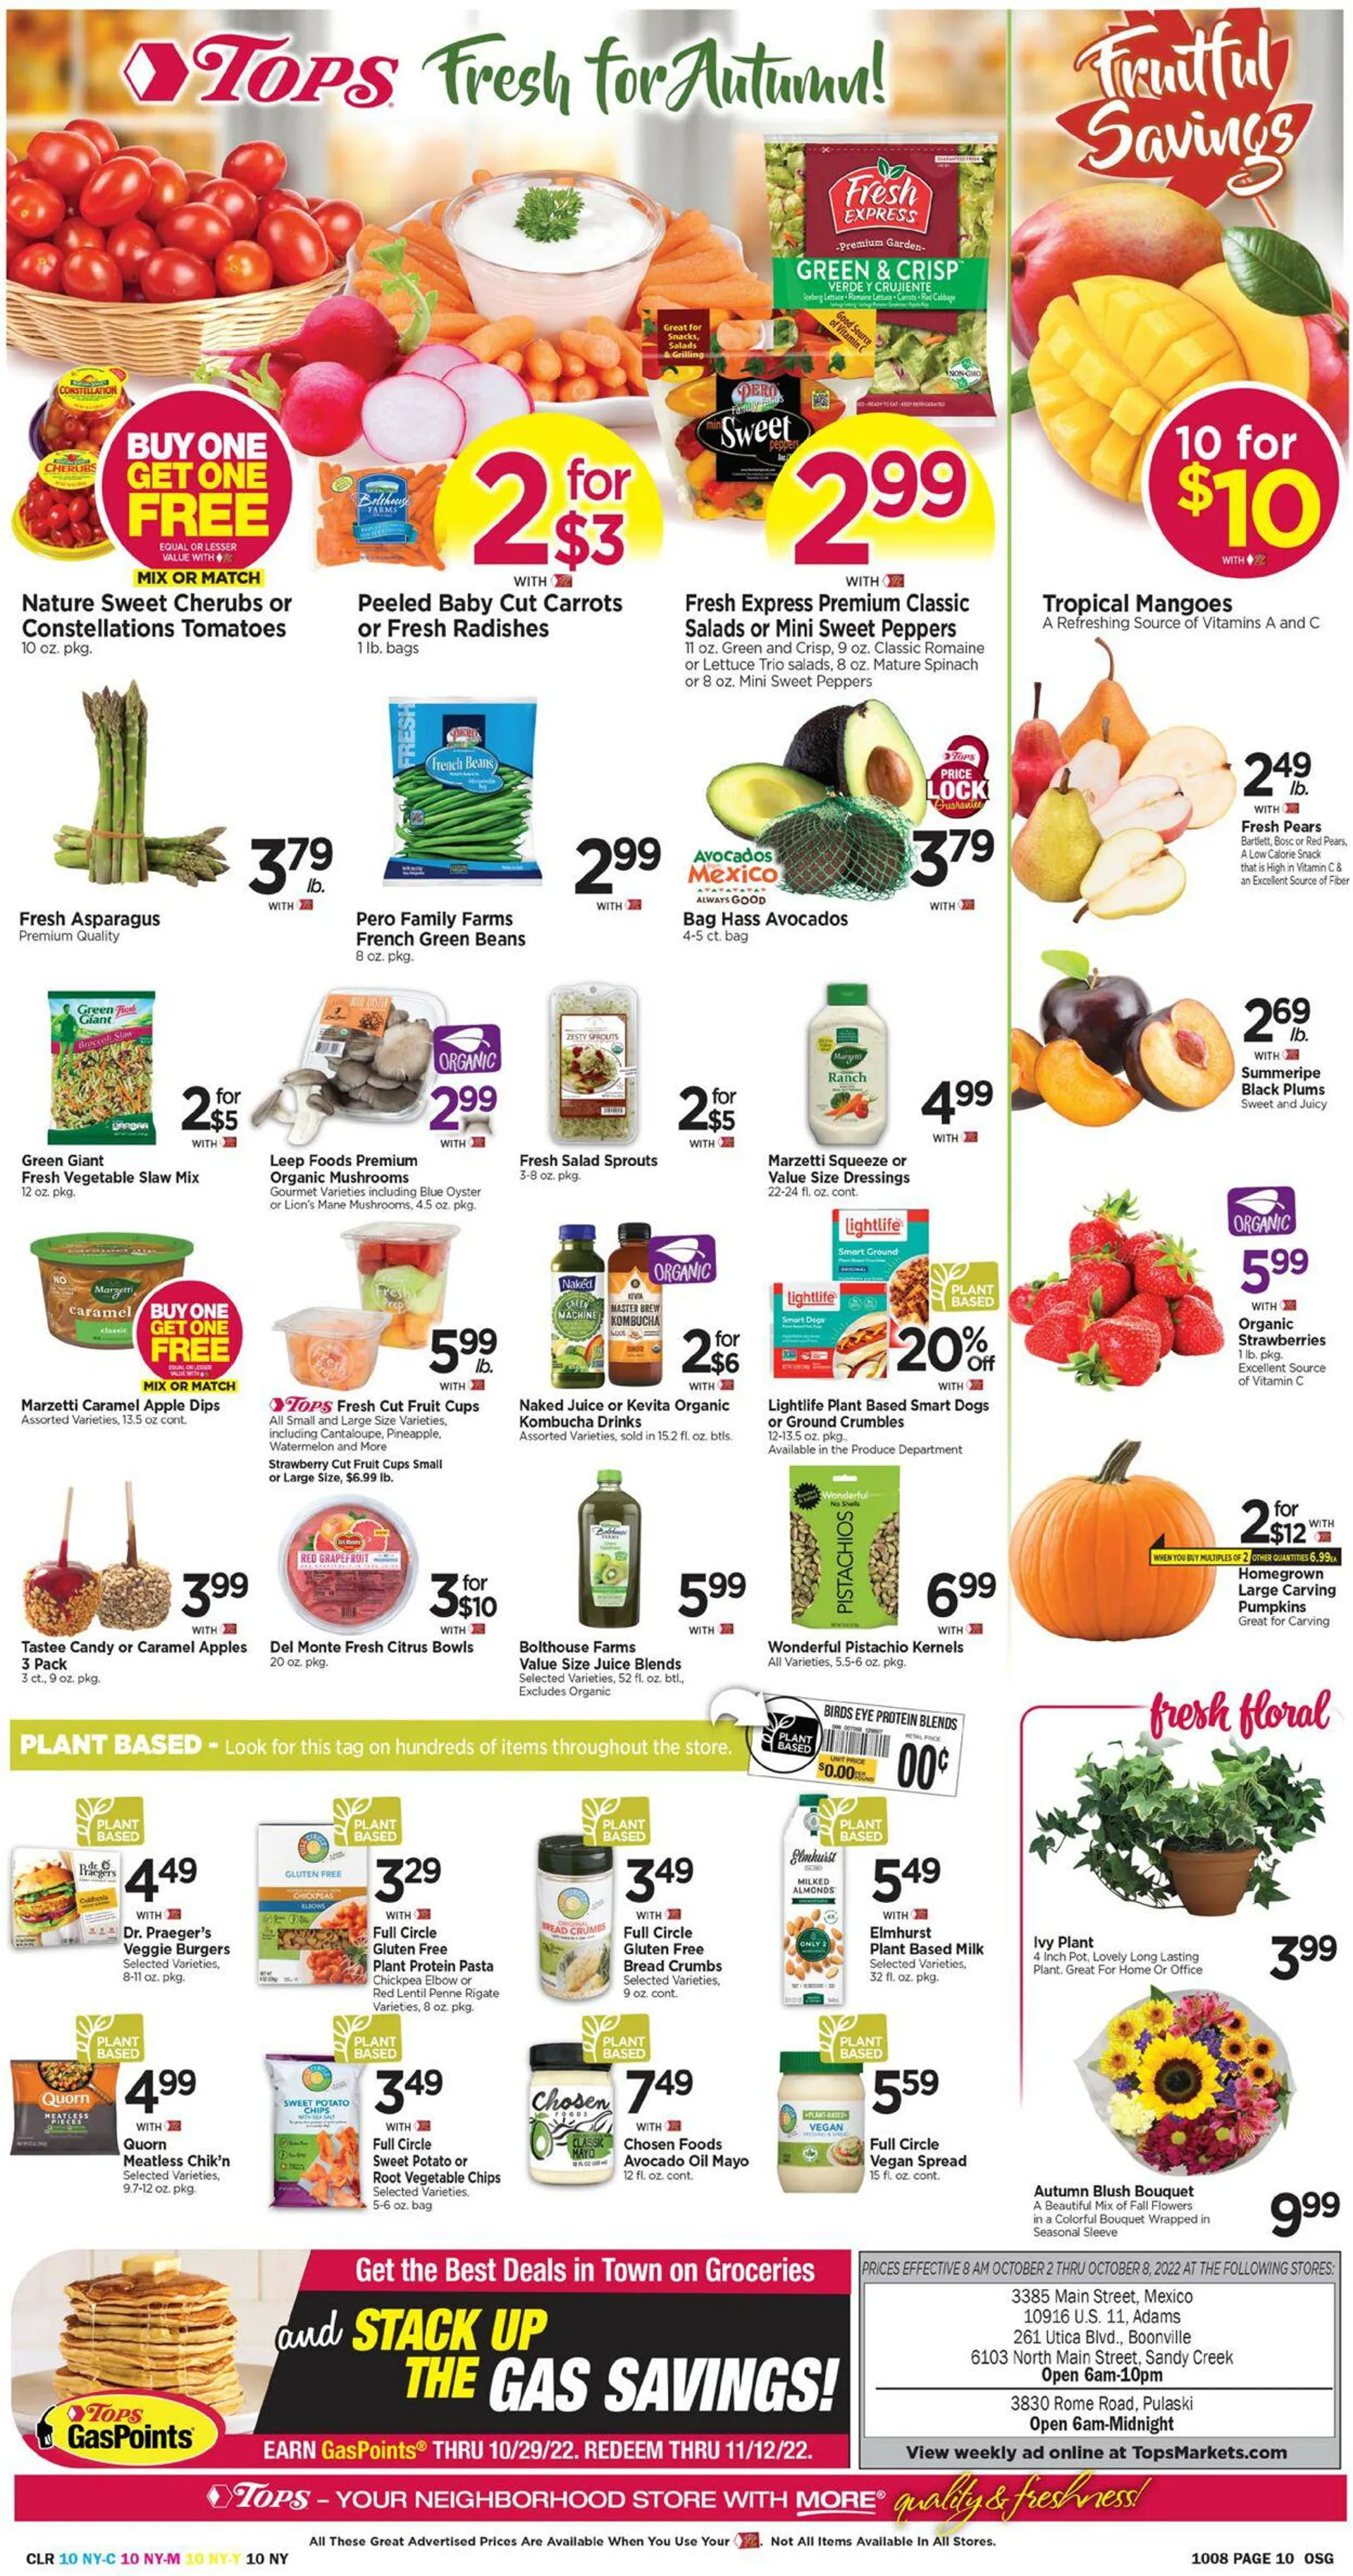 Tops Friendly Markets Current weekly ad - 10